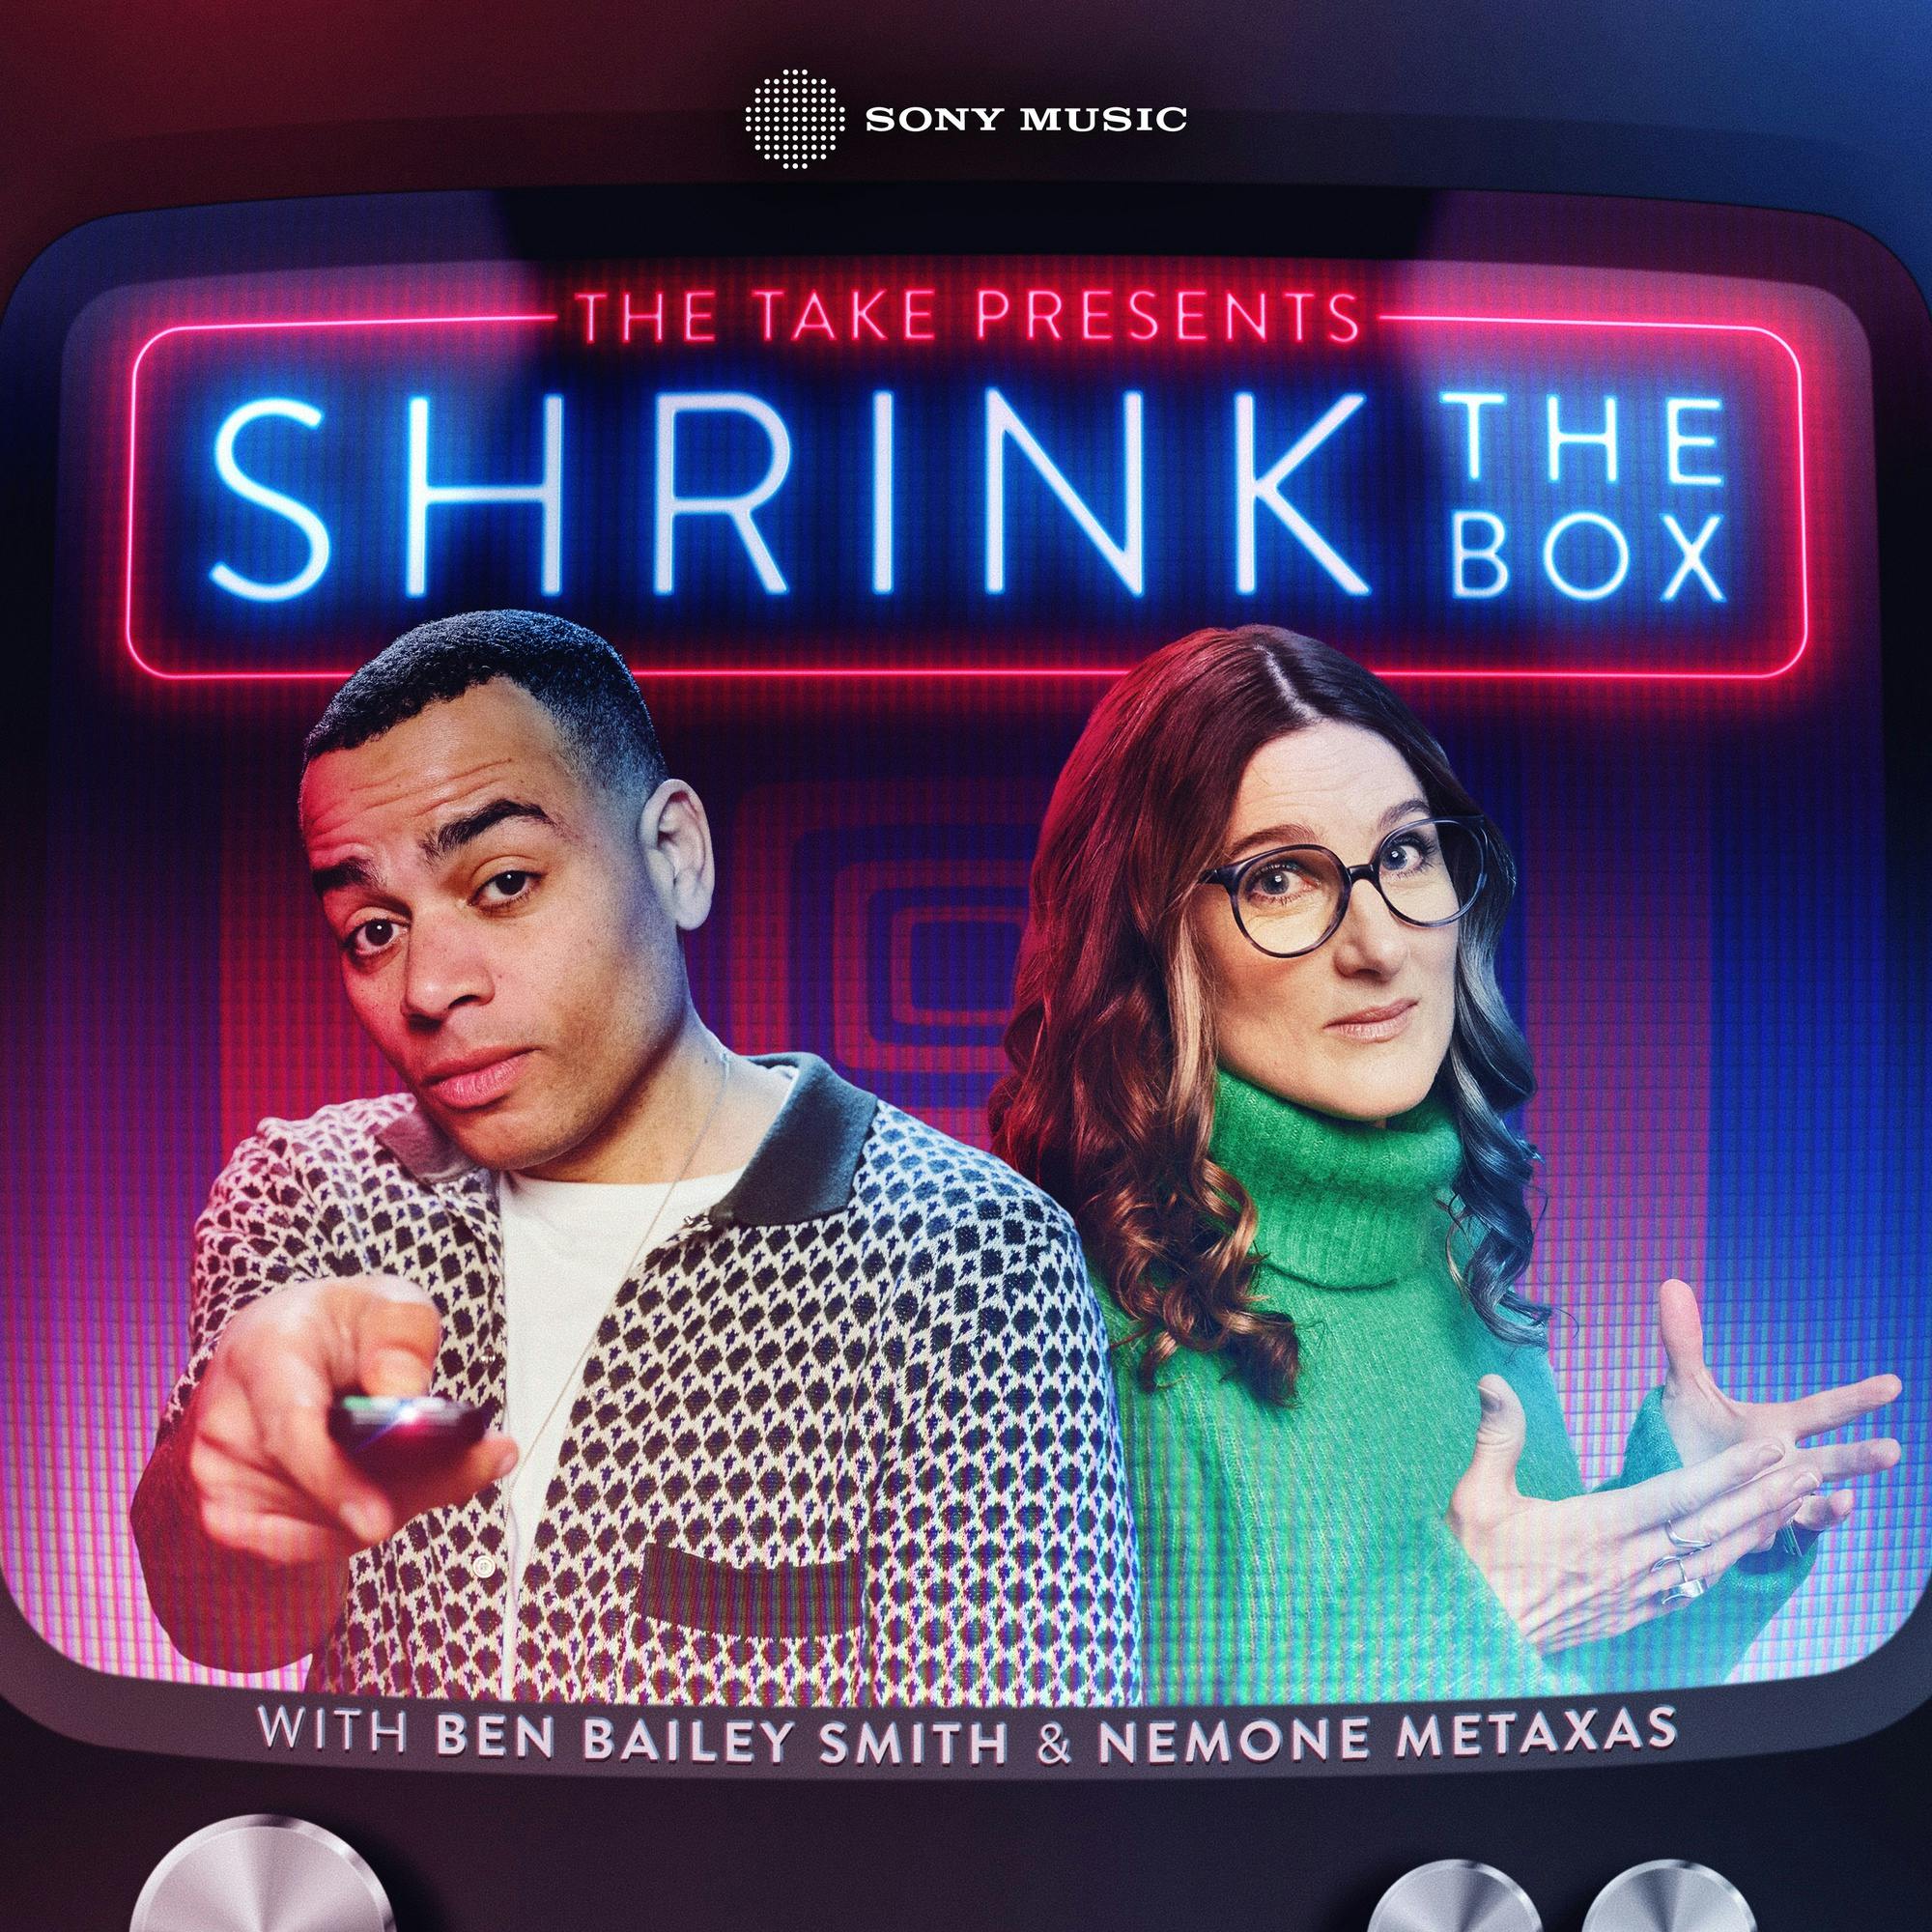 Shrink the Box rises from the dead for a second season